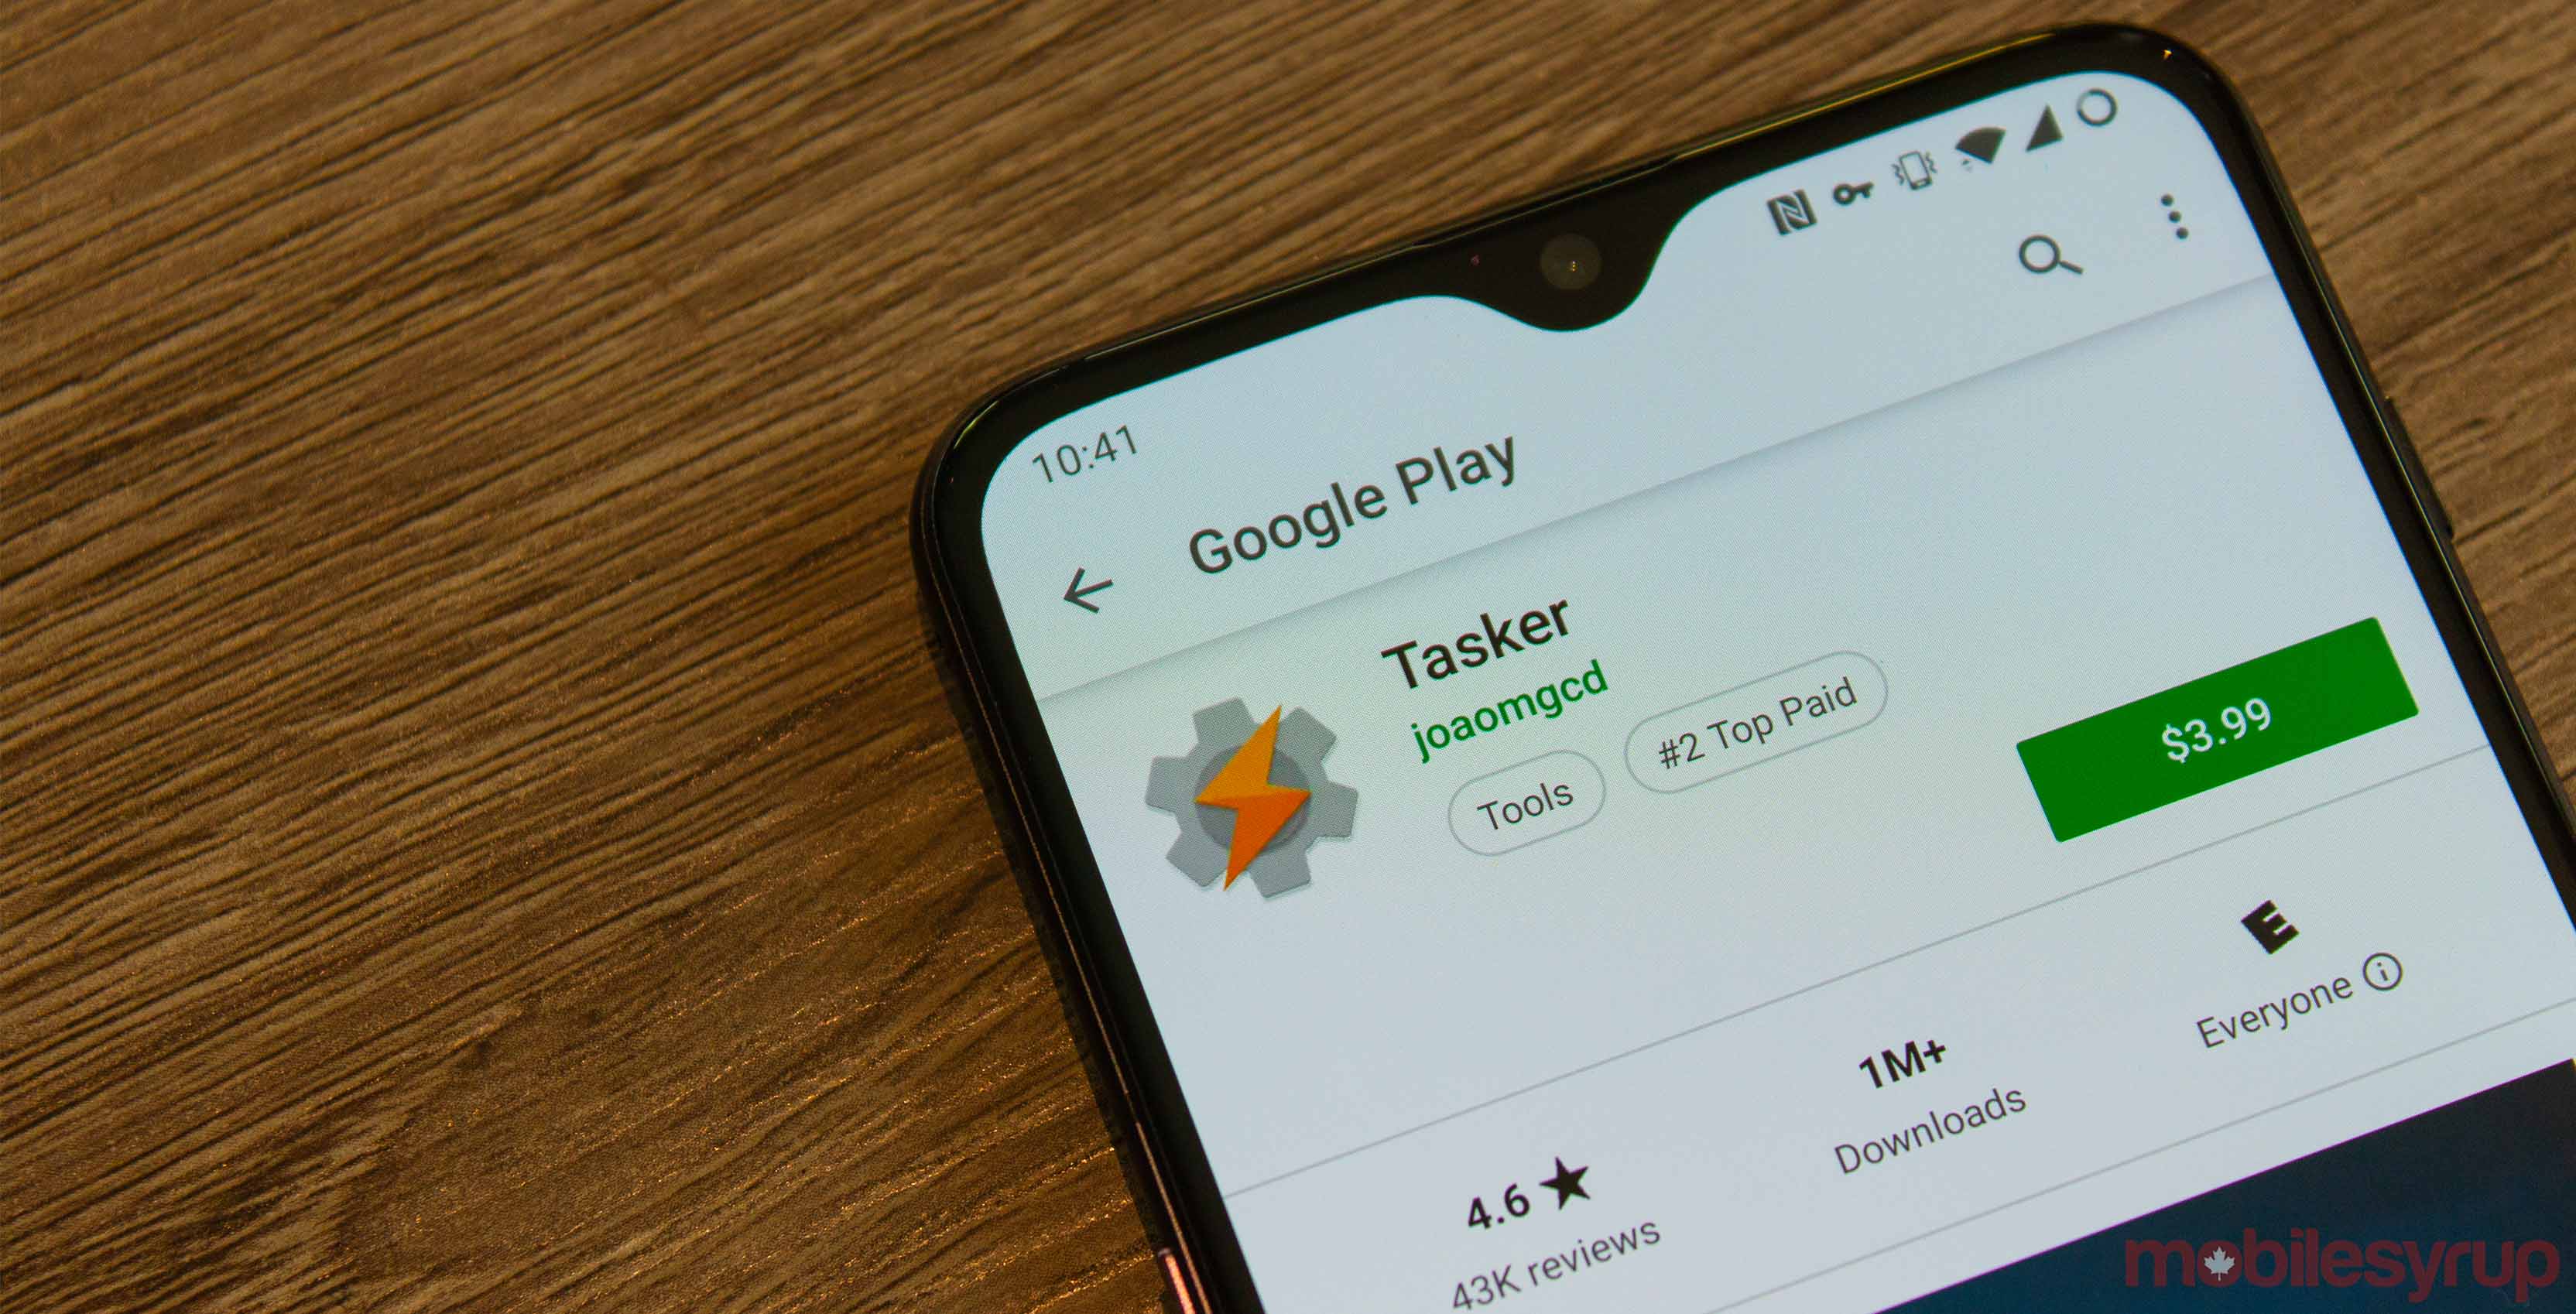 klo Blive kold Peer Google will exempt Tasker from call log and SMS permissions restriction